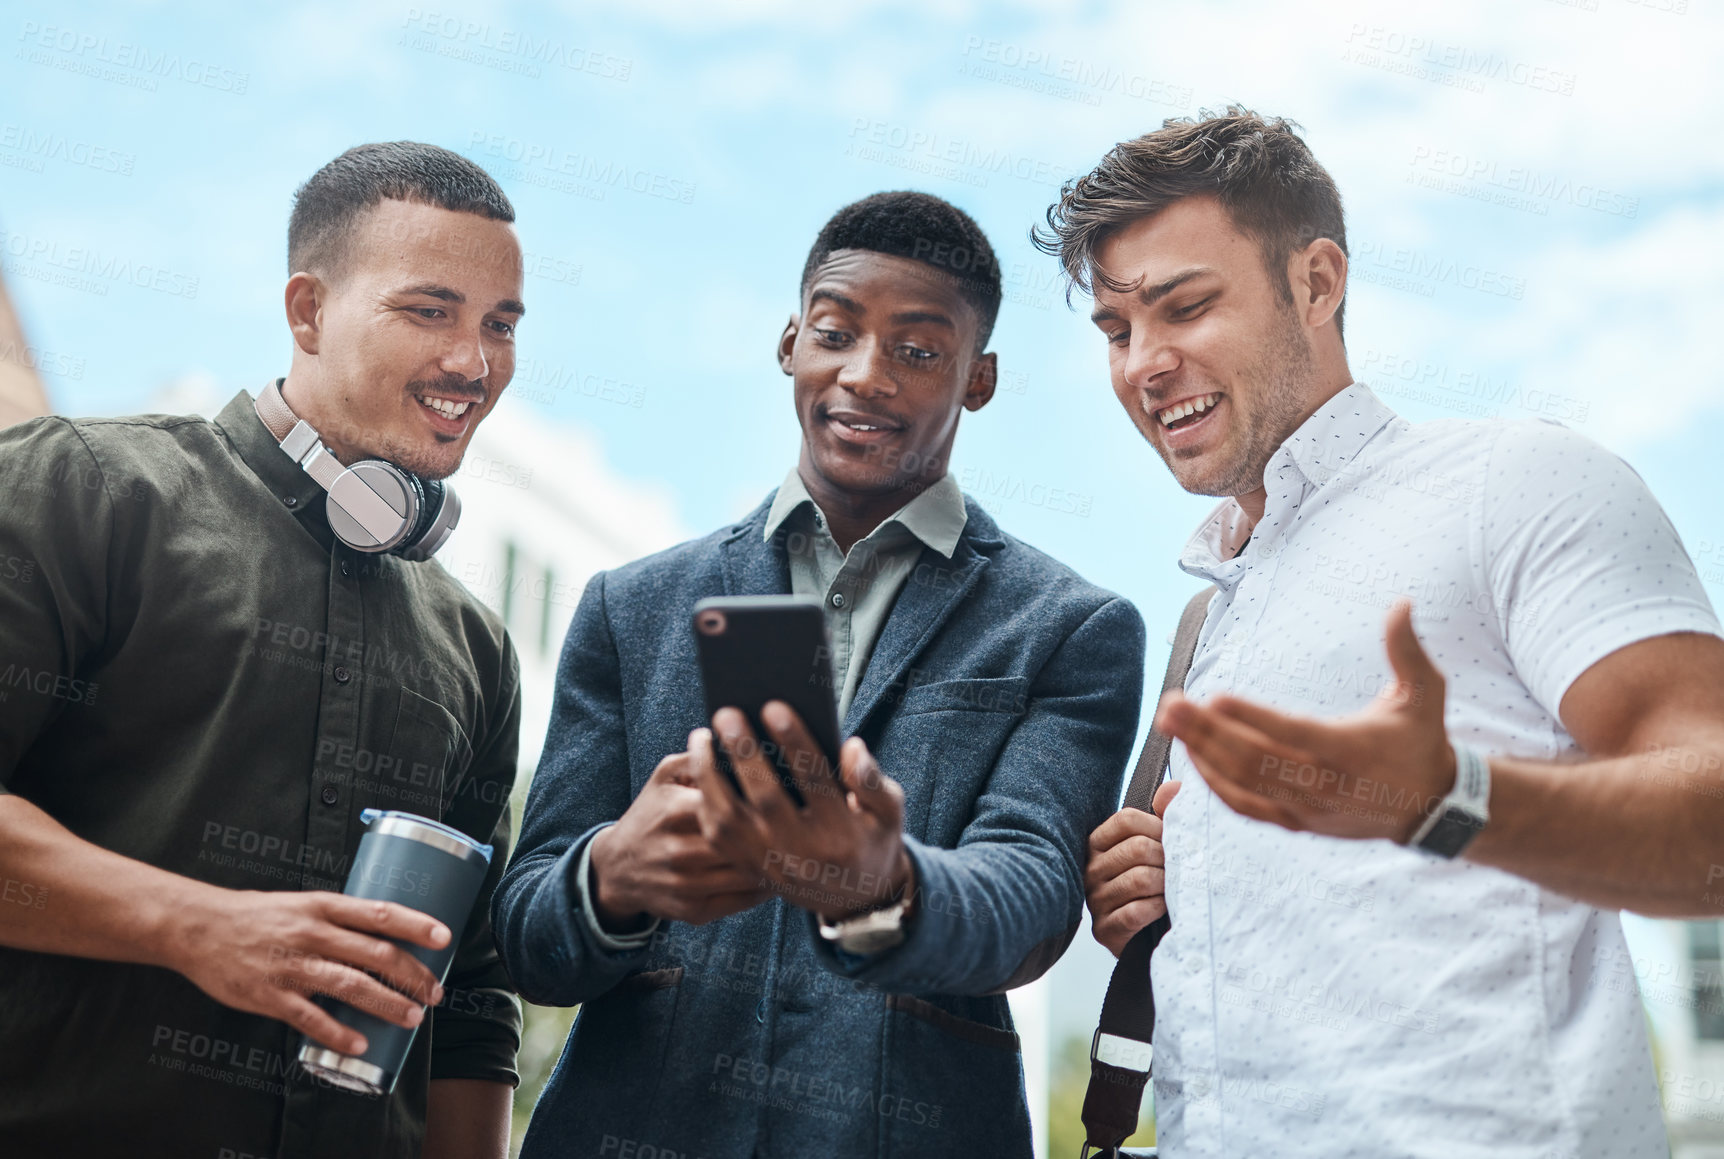 Buy stock photo Shot of a group of businesspeople using a smartphone together against an urban background